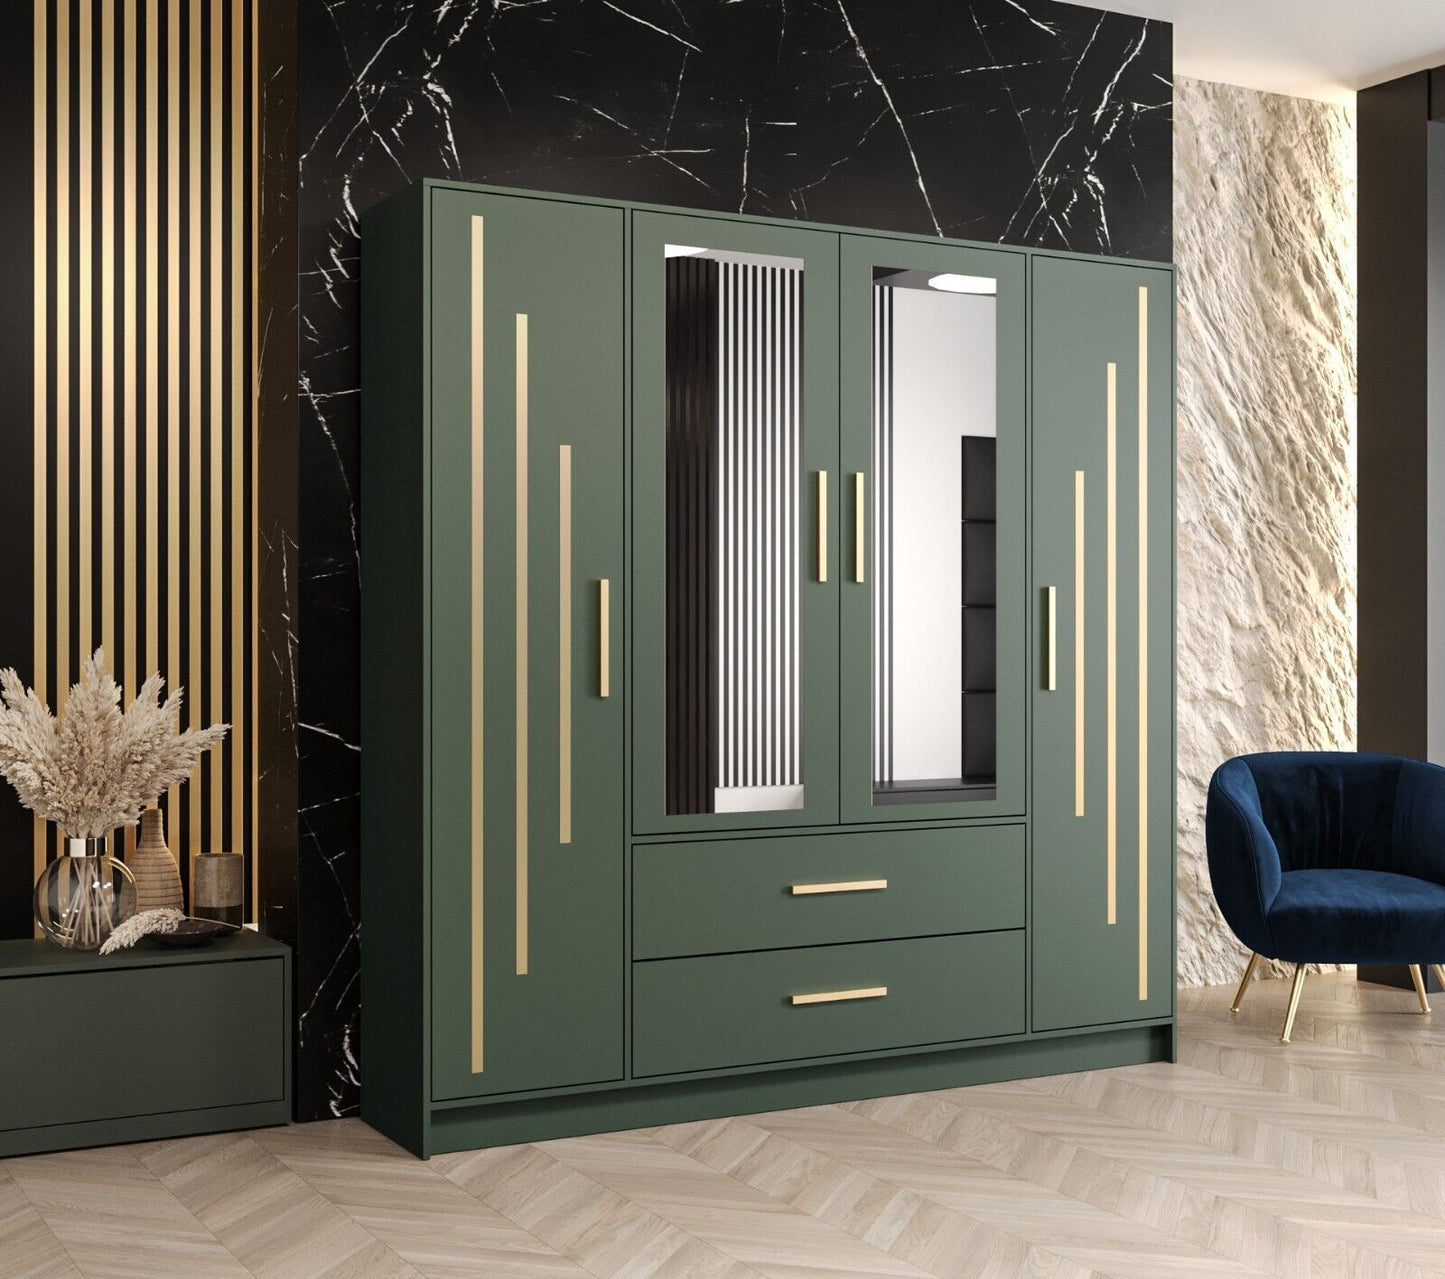 Wardrobe BERLIN 4 in colour Green 201 cm with Hanging Rail Shelves Drawer Mirror